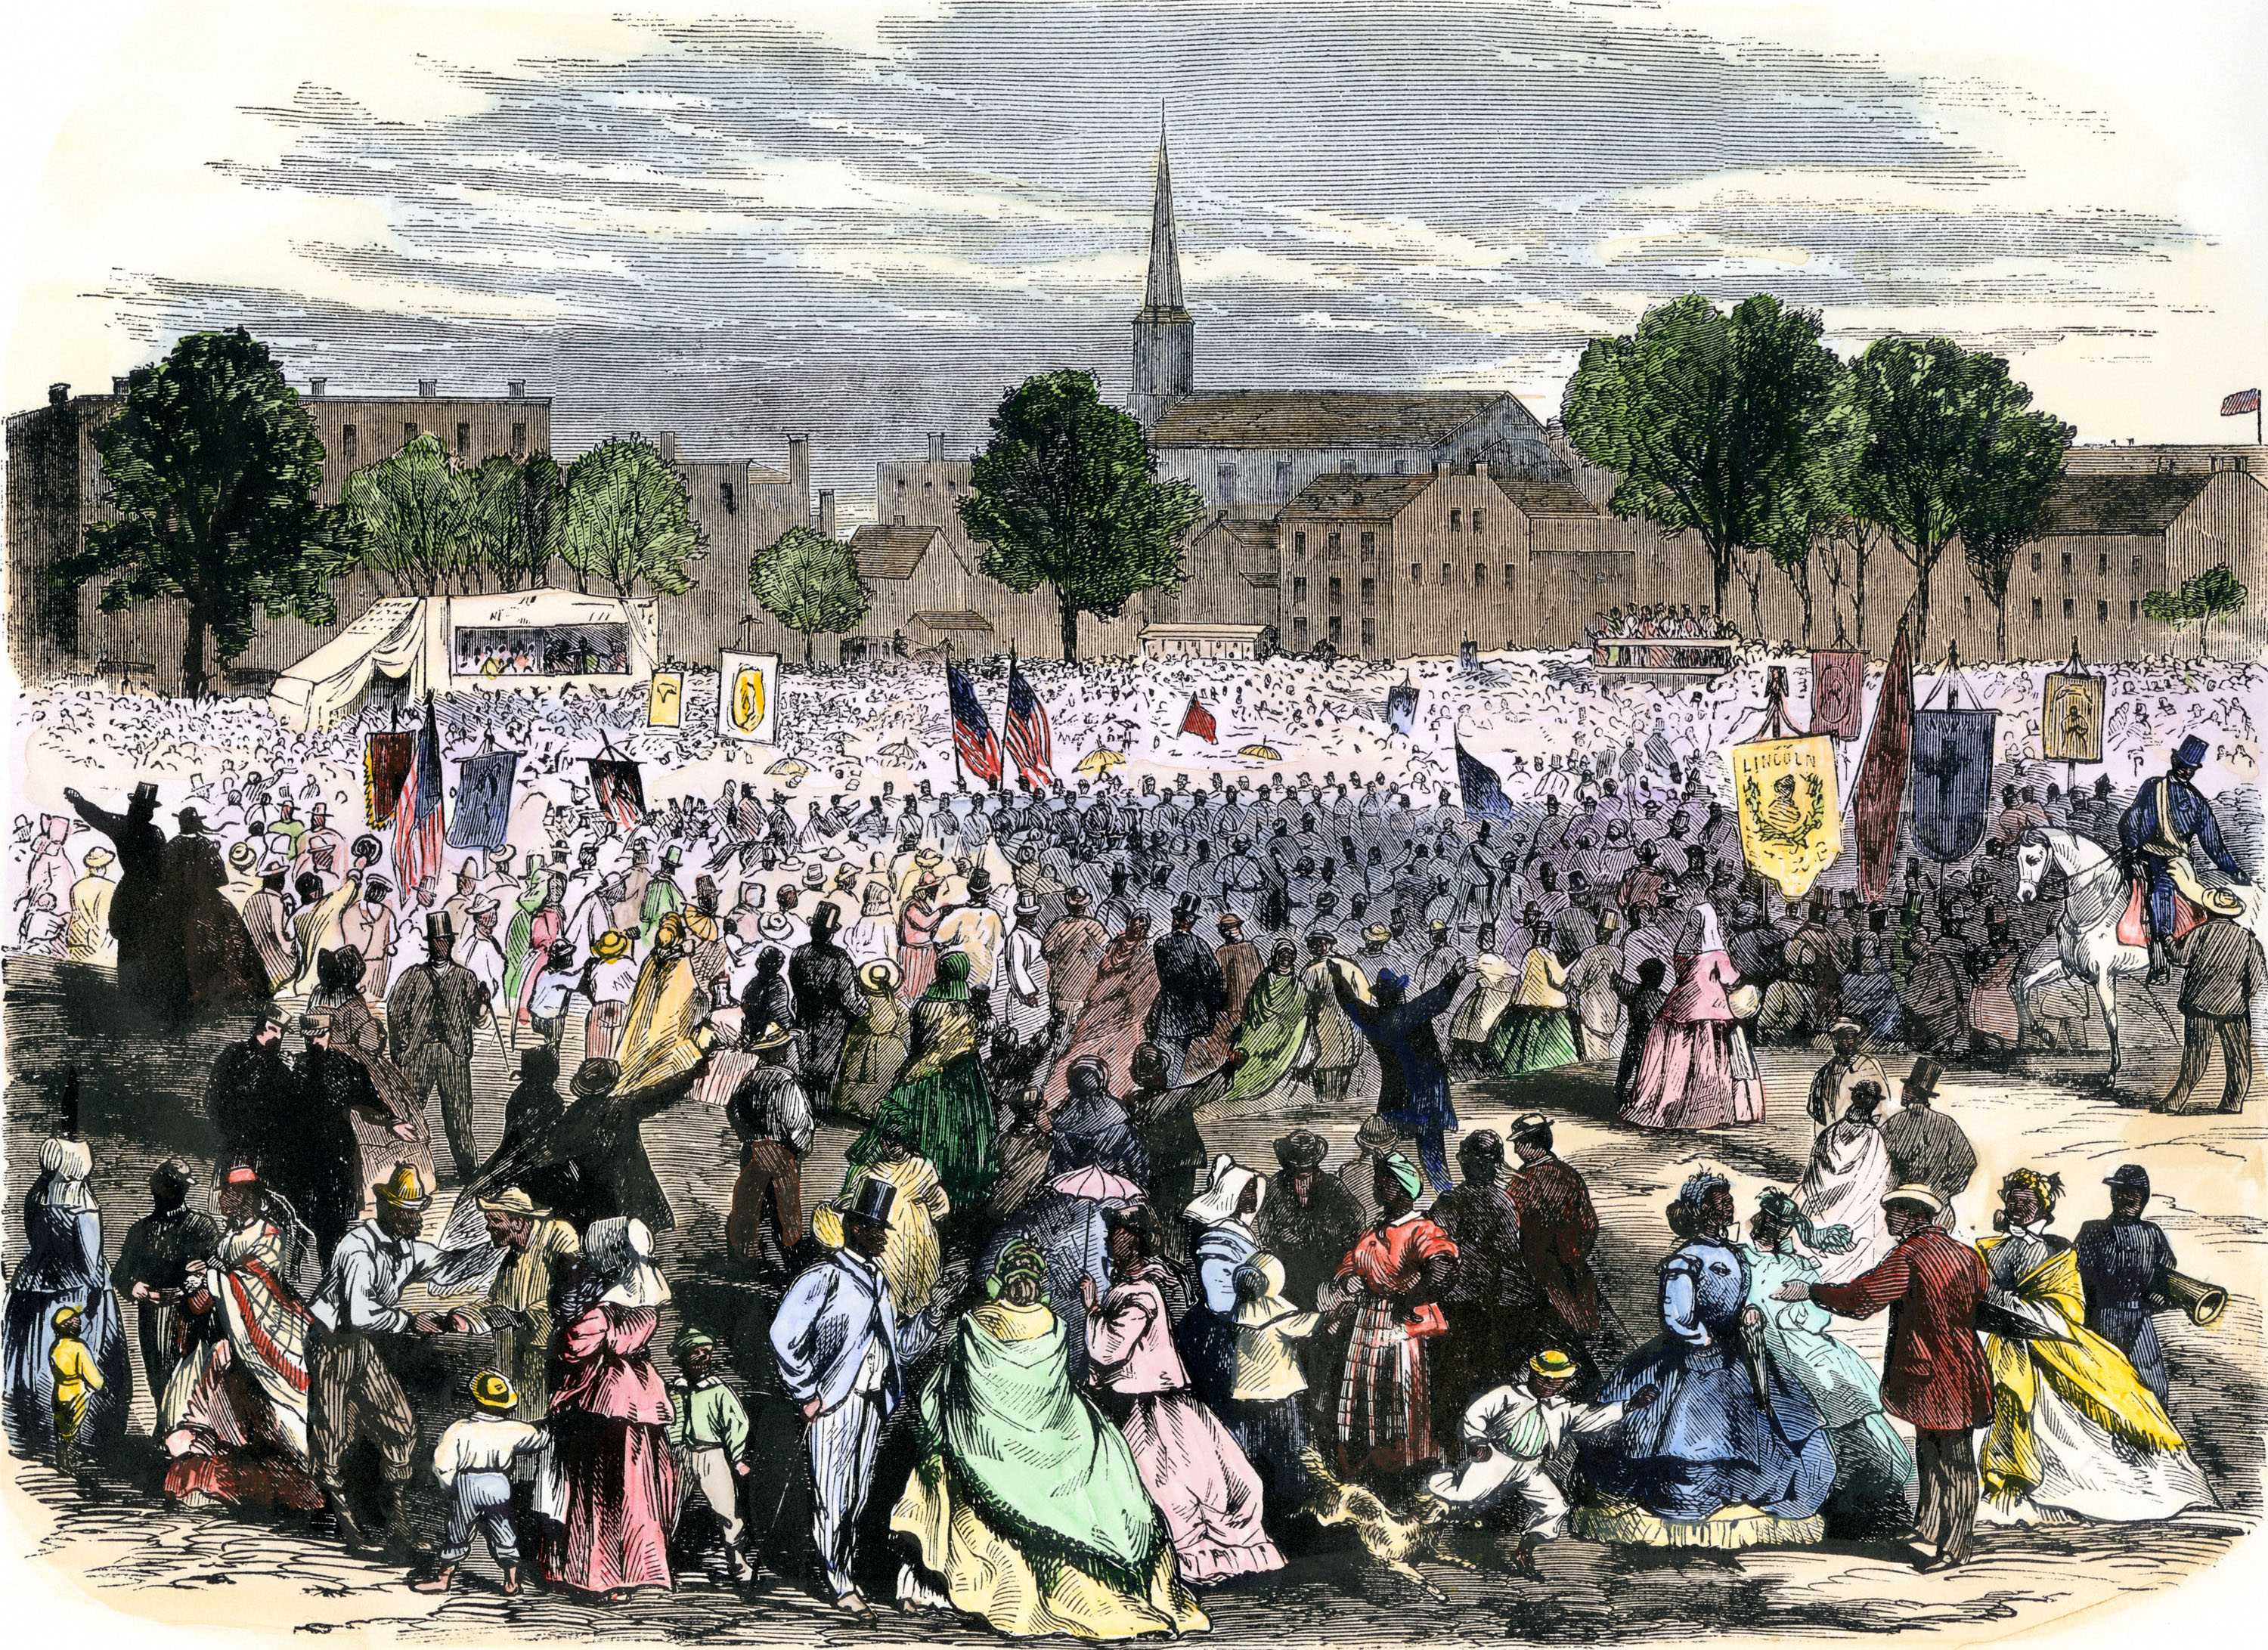 A colored drawing of a large crowd celebrating of the abolition of slavery in DC. A few carry banners and flags.